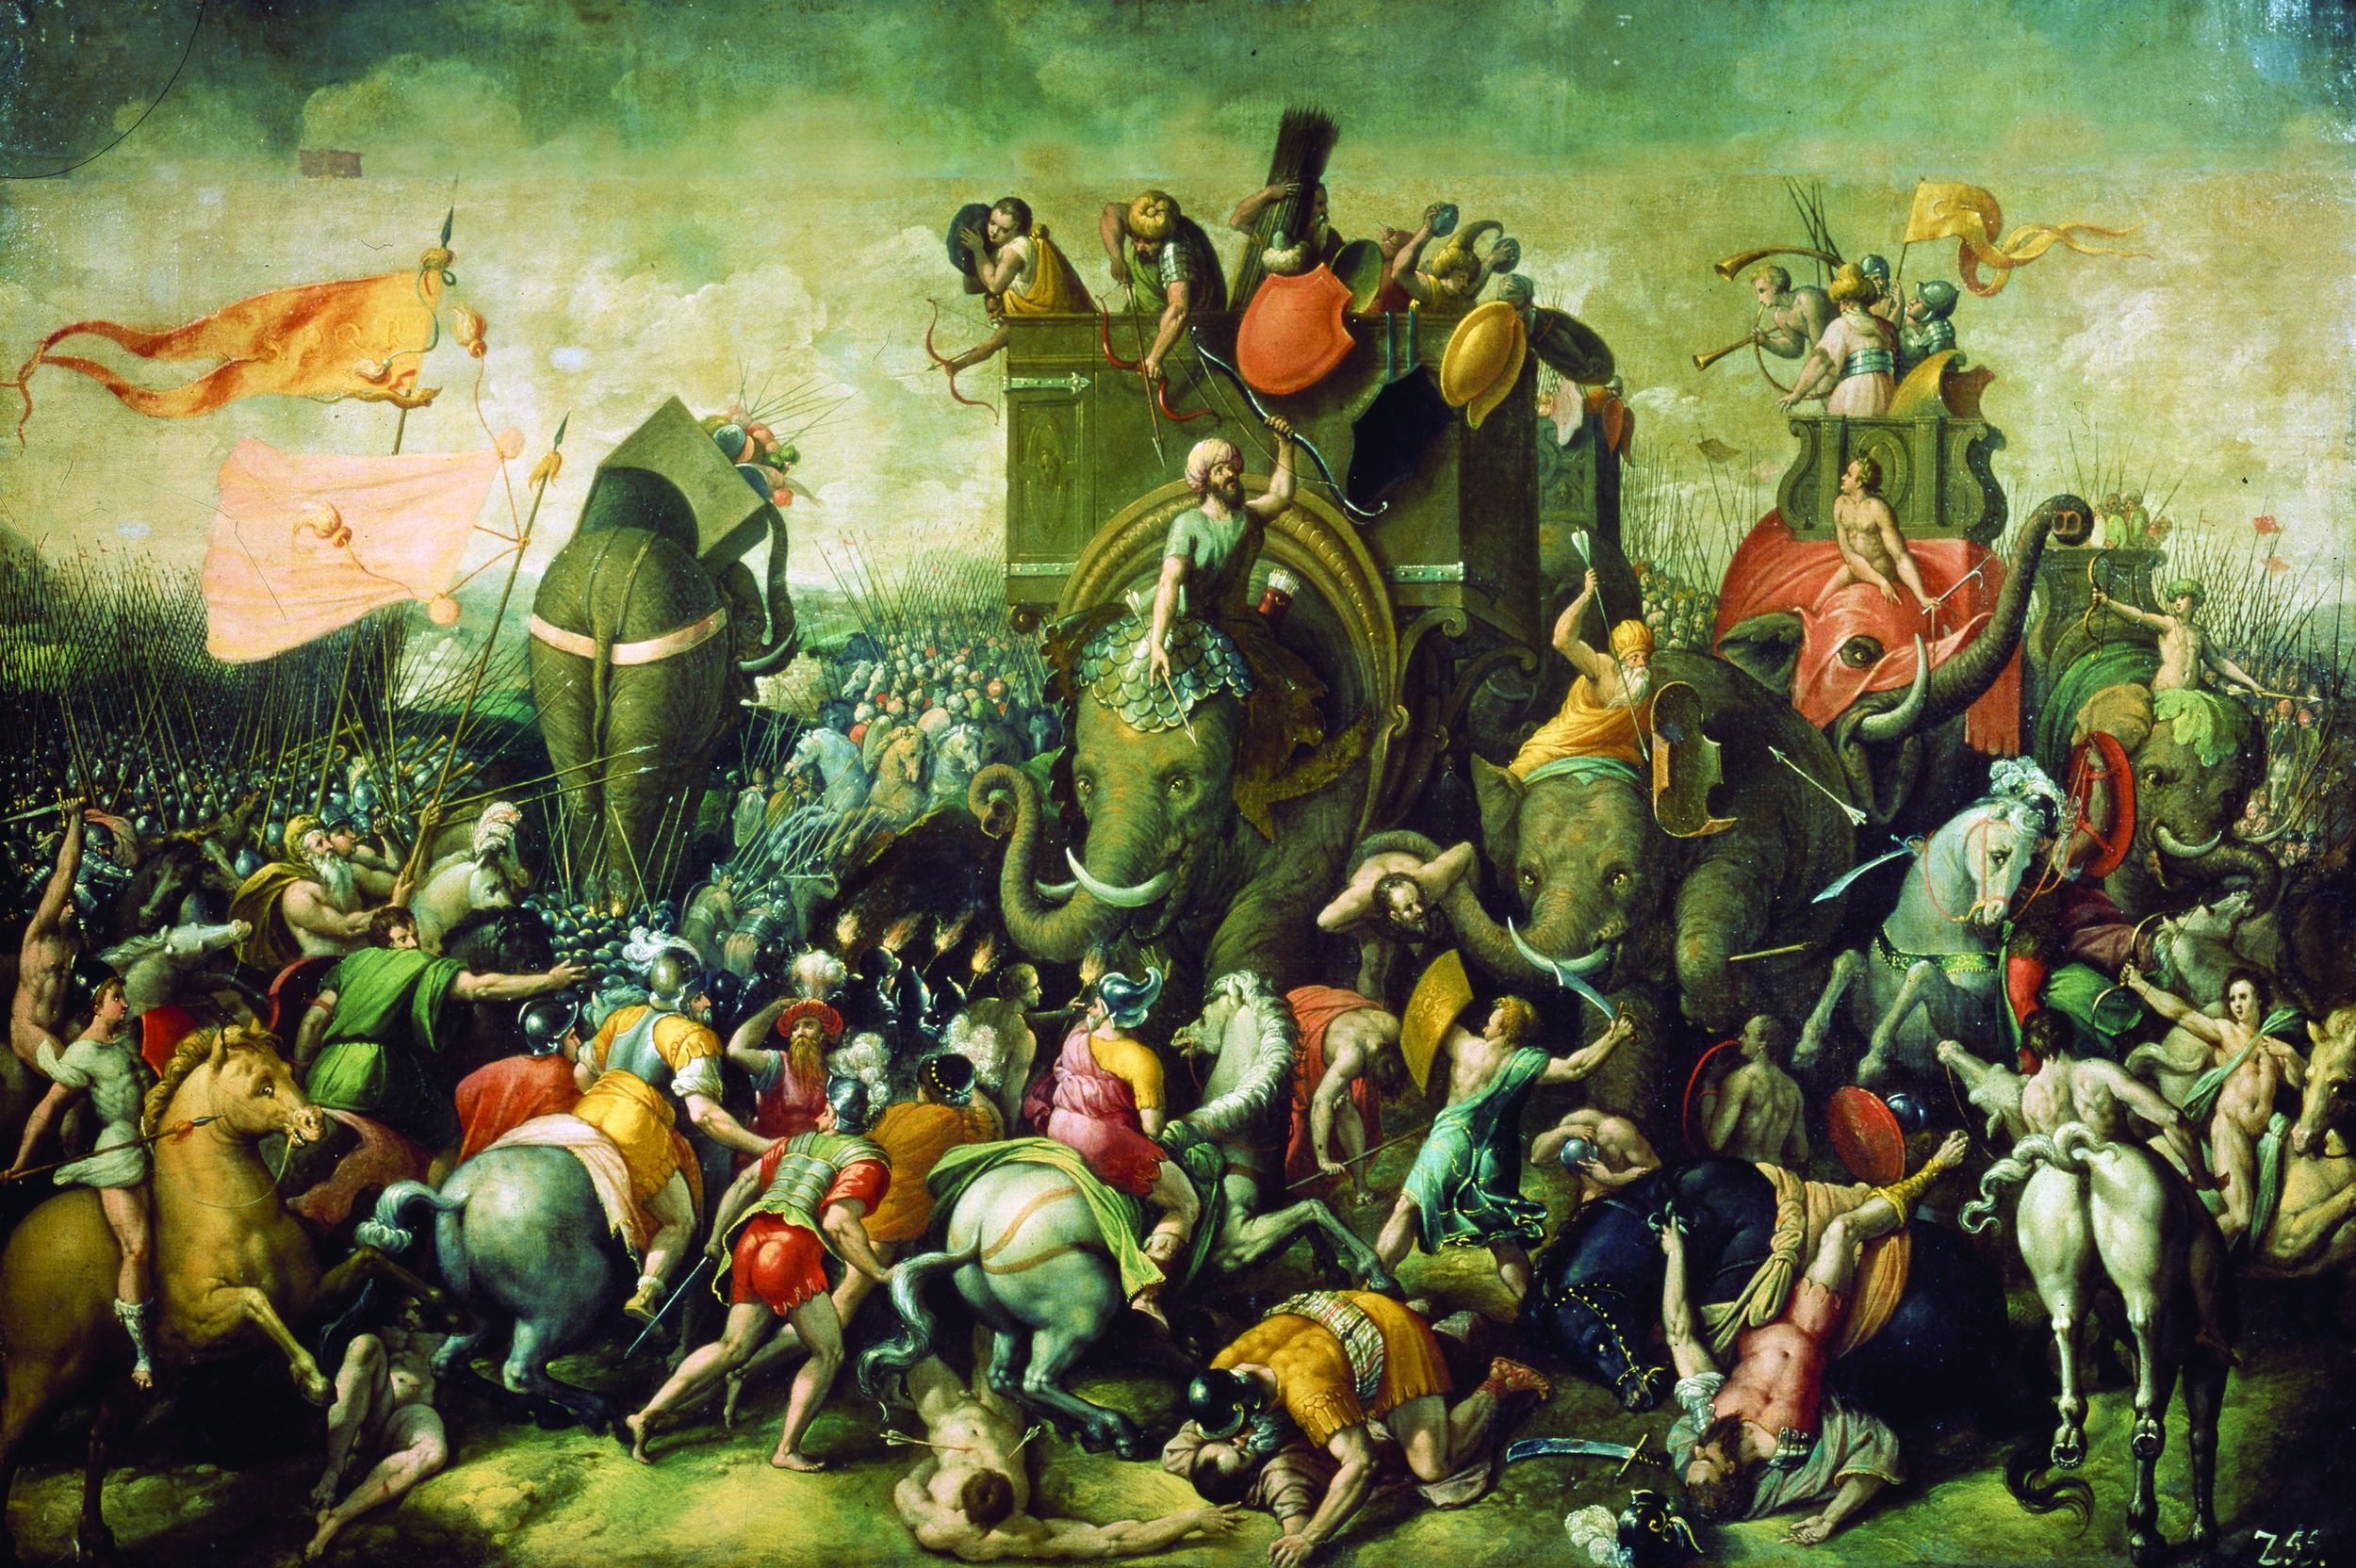 Roman general Scipio defeats Hannibal at the Battle of Zama in 202 bc. Hannibal committed suicide a few years later. 